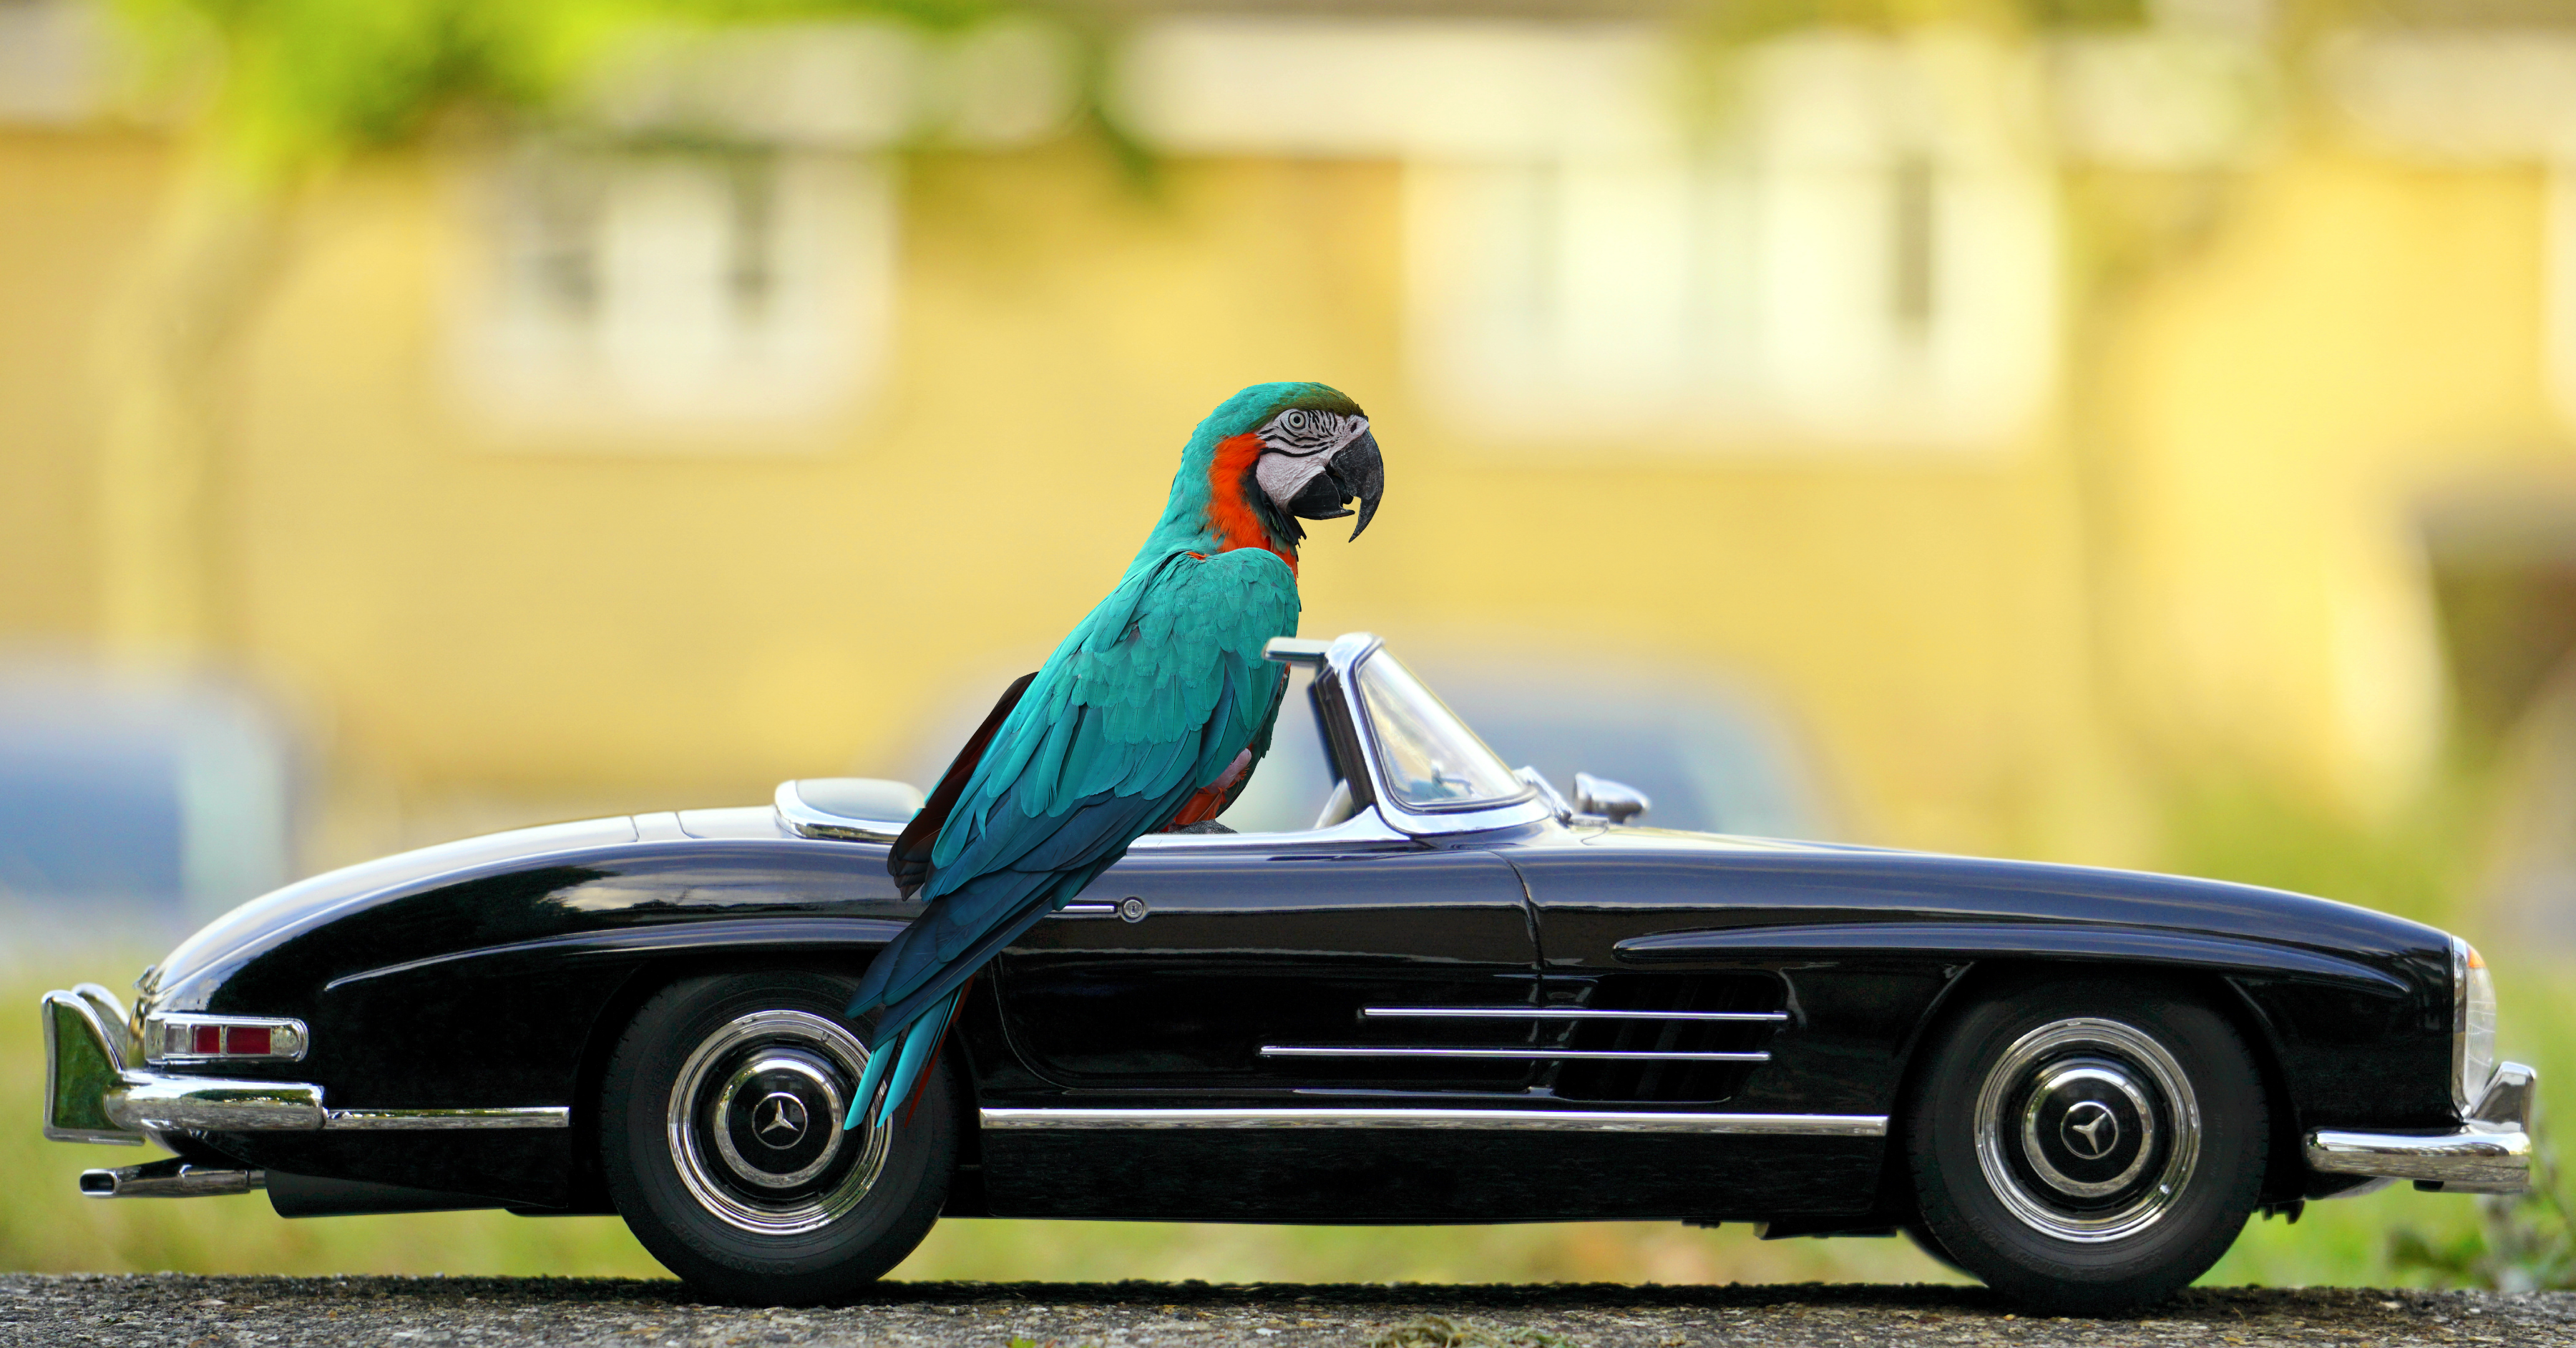 Macaw sitting on a convertible car